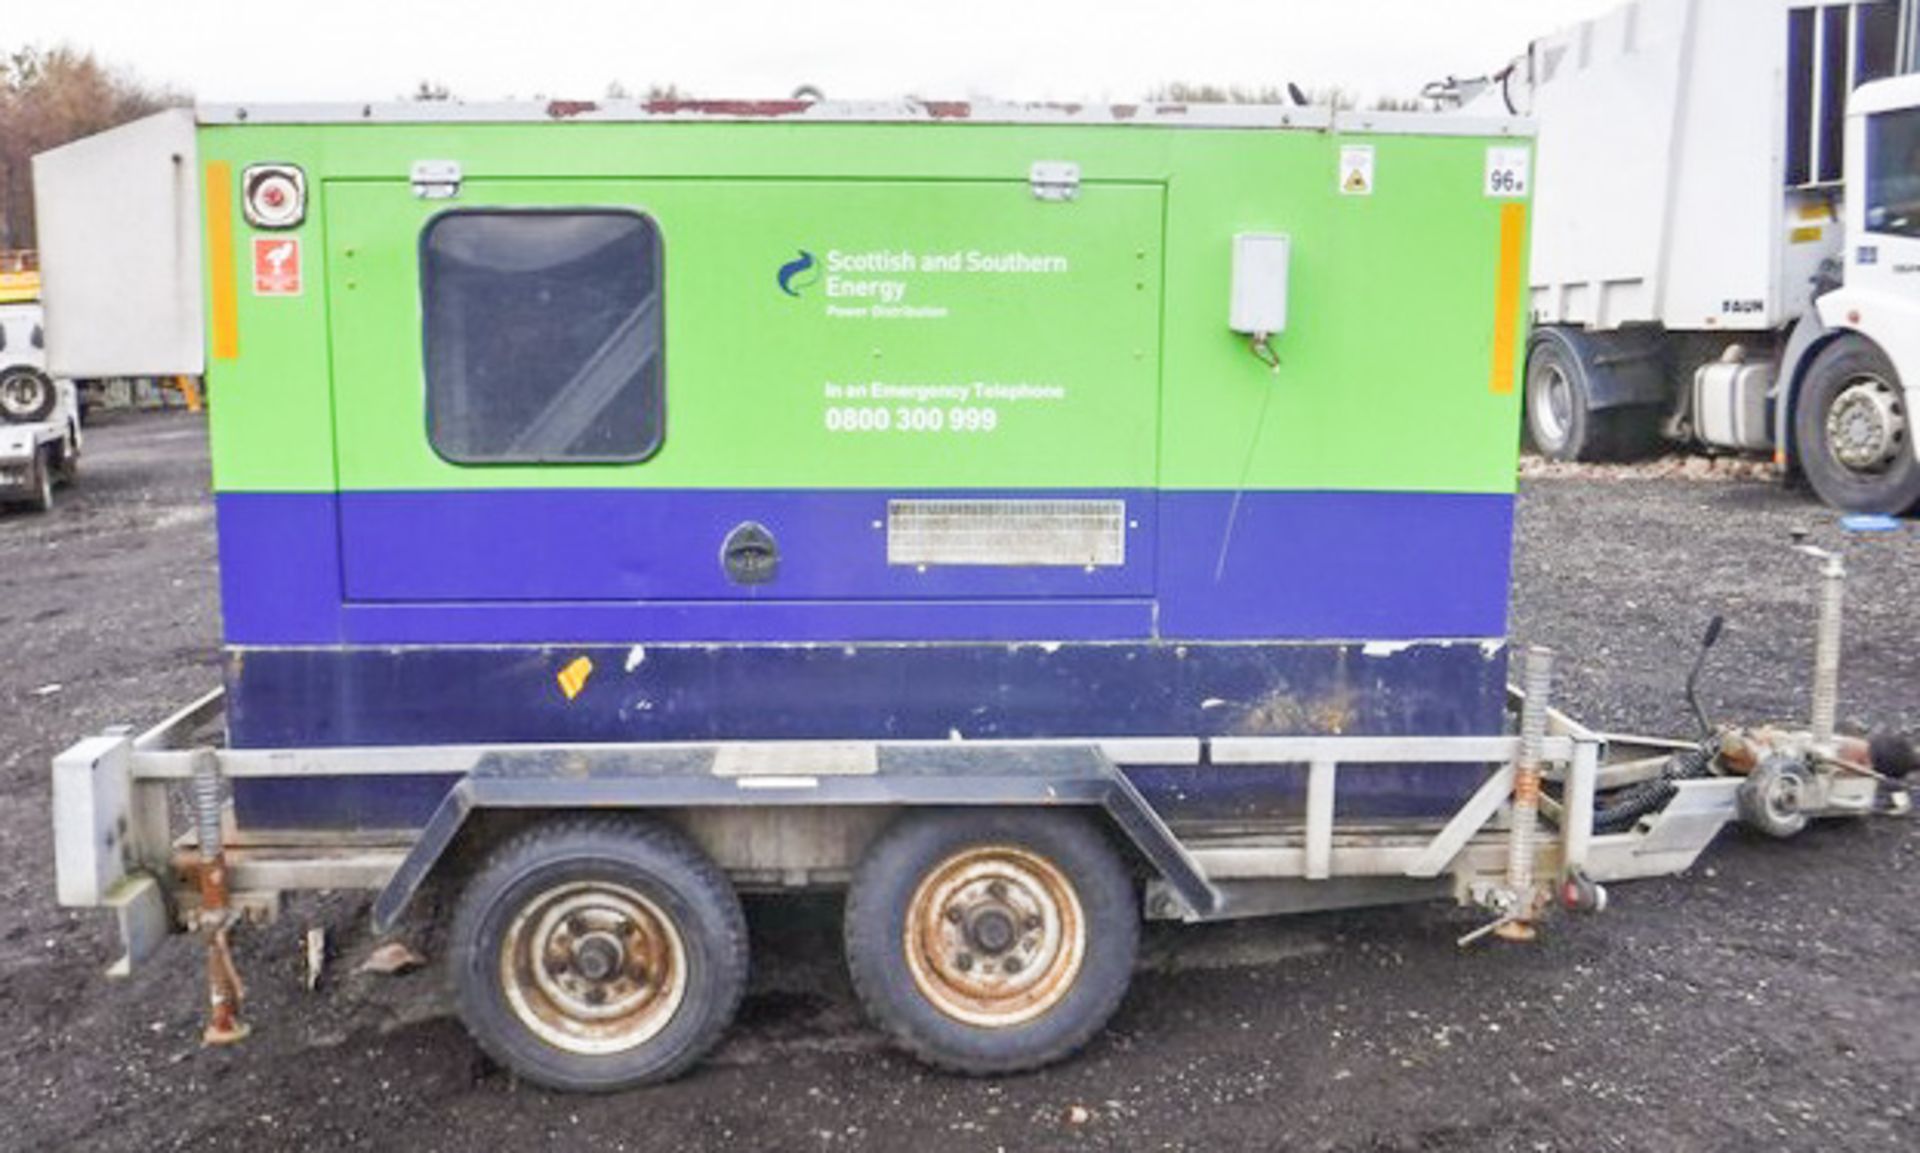 GENERATOR WITH TRAILER, TYPE P100, 100KVA,415 VOLTS, 80KW. S/N FGWPEP04JE, ASSET - 747-3035 - Image 6 of 12